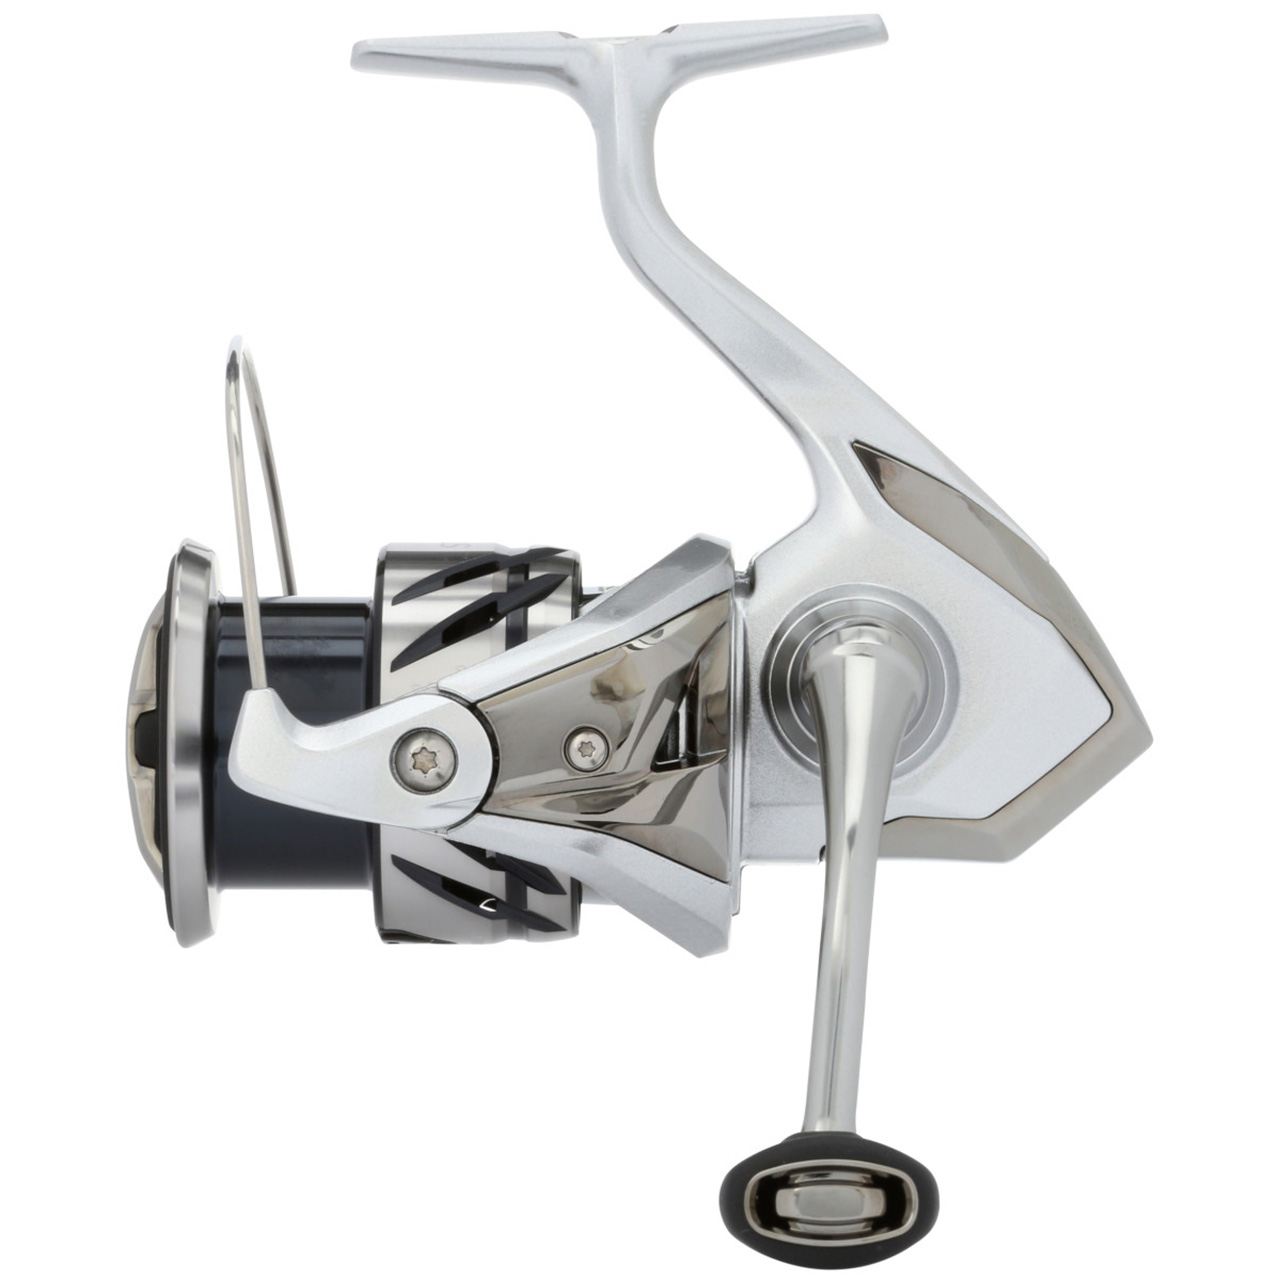 fishing reel fddl metal, fishing reel fddl metal Suppliers and